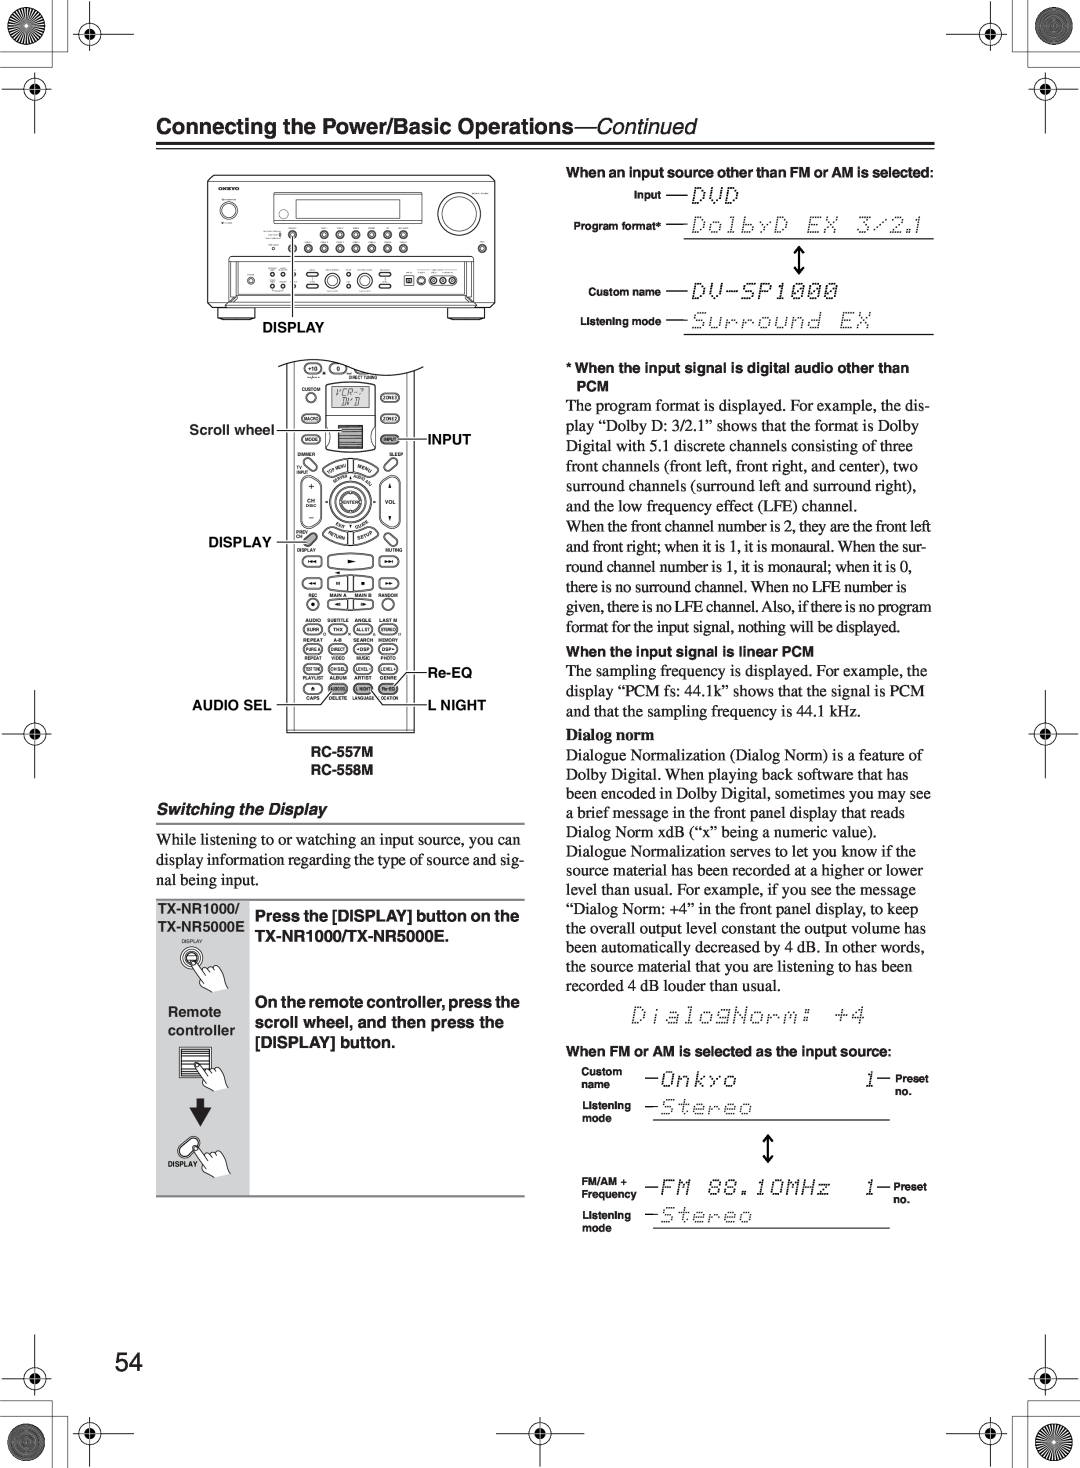 Onkyo TX-NR1000 instruction manual Connecting the Power/Basic Operations—Continued, Switching the Display, Dialog norm 